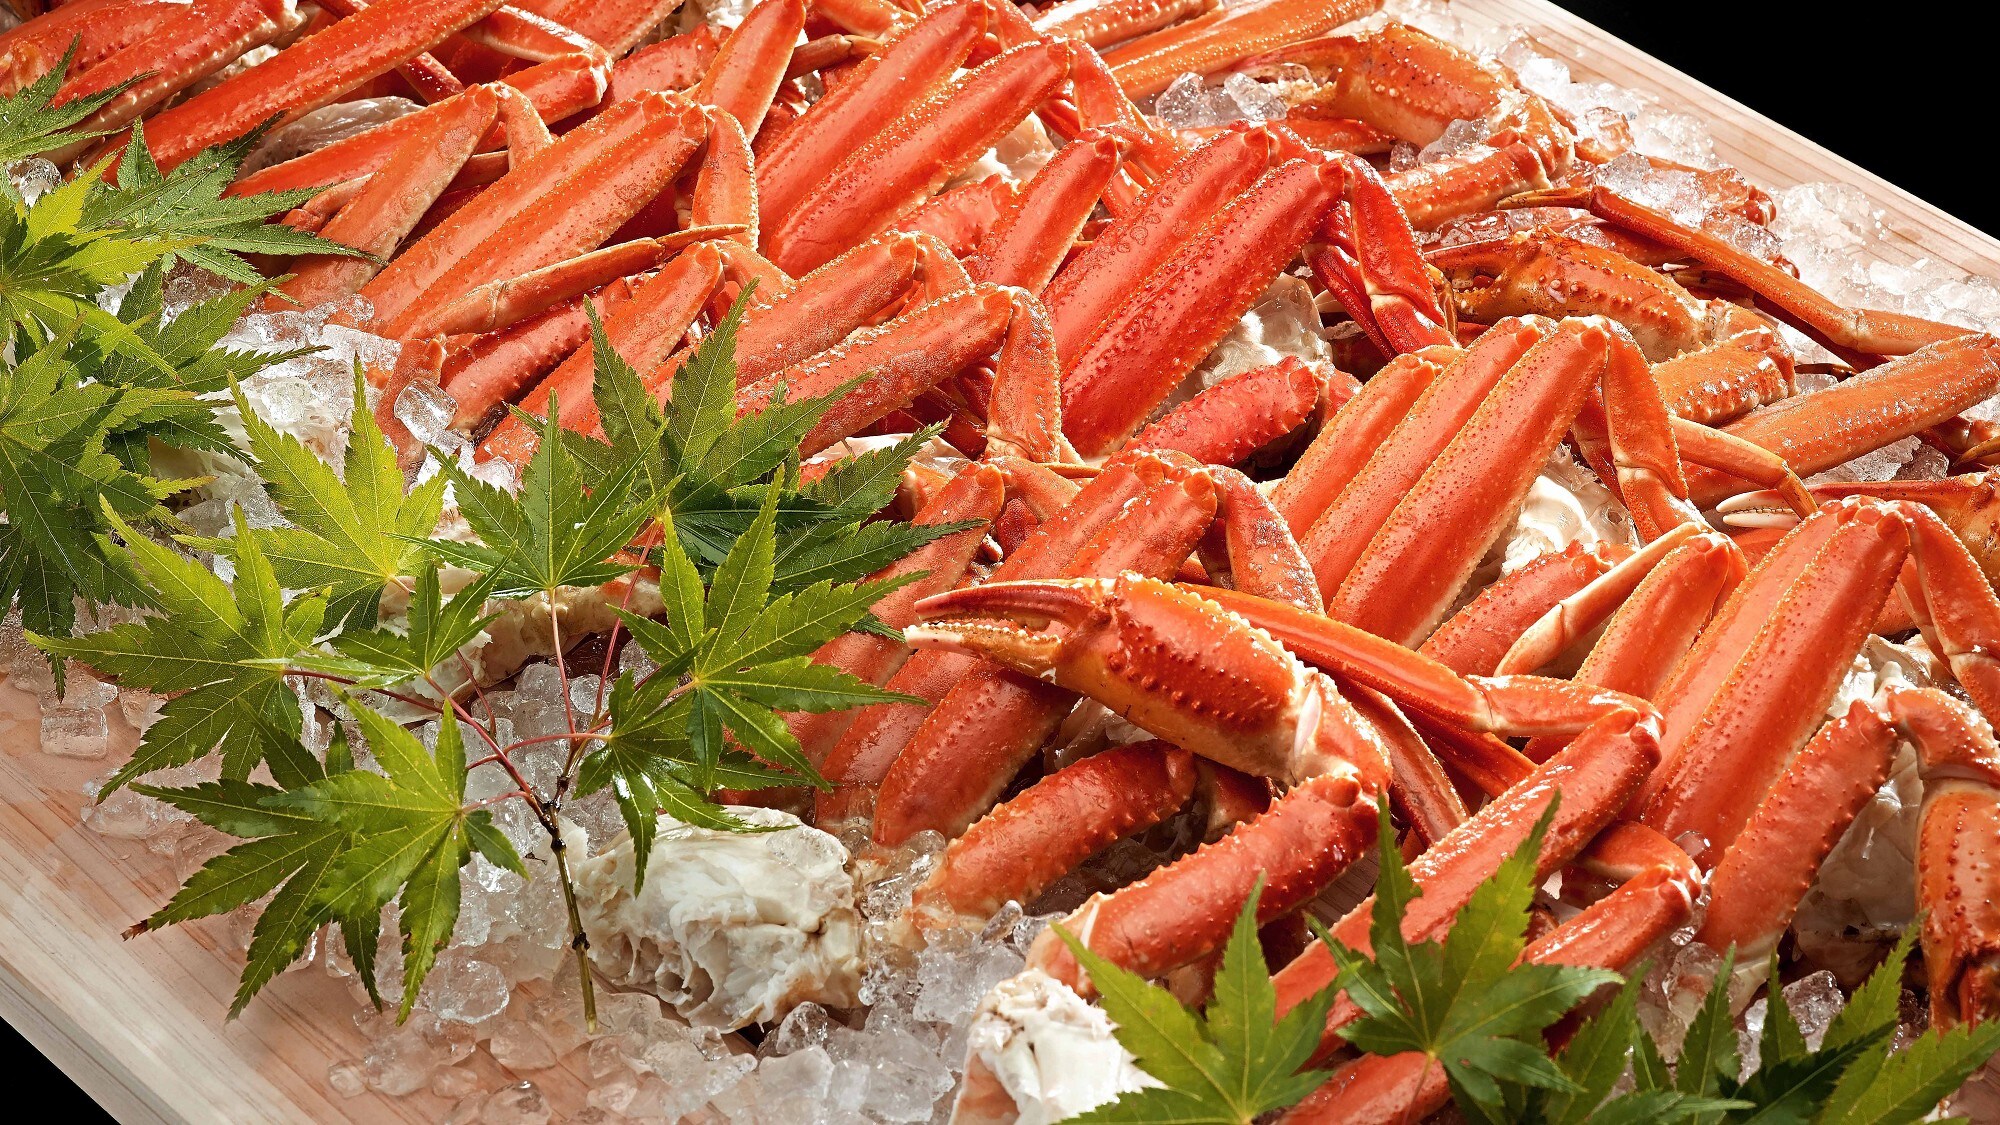 Special order All-you-can-eat snow crab (claws, legs)